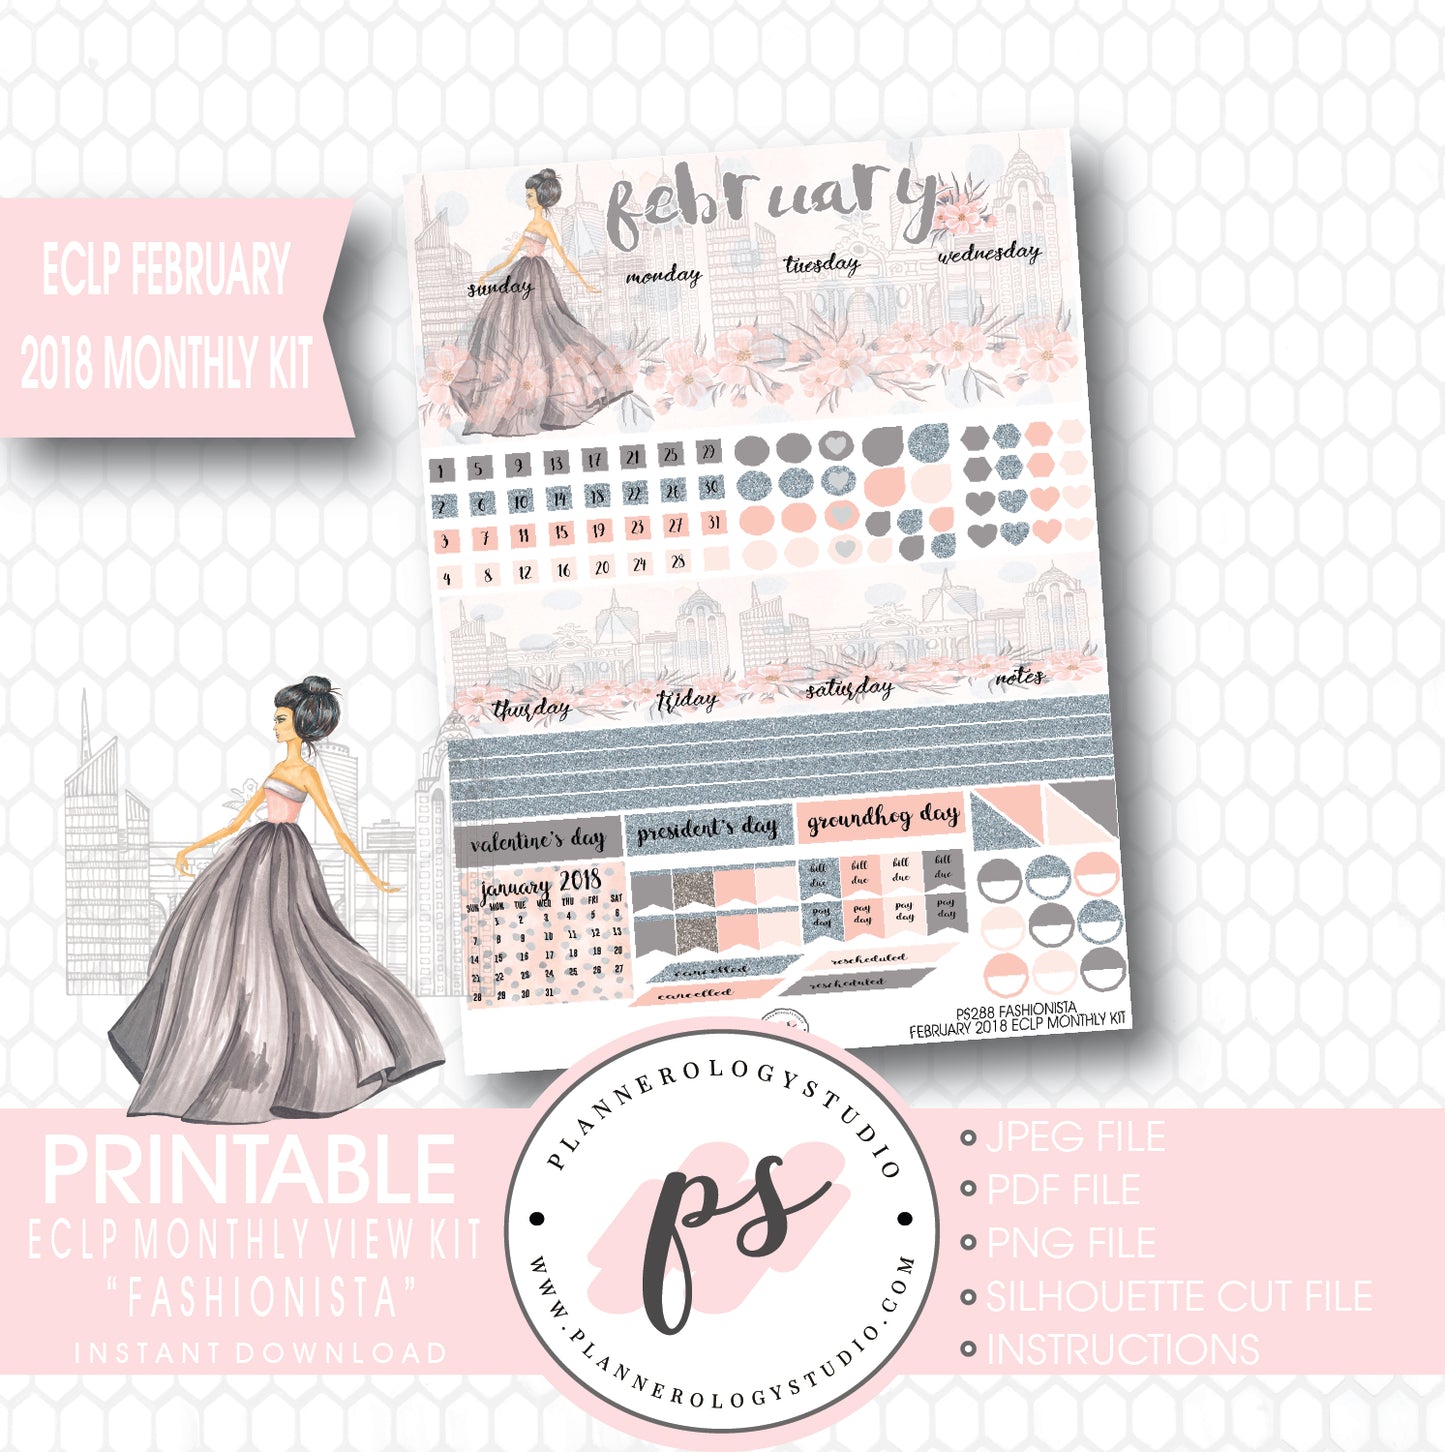 Fashionista February 2018 Monthly View Kit Printable Planner Stickers (for use with ECLP) - Plannerologystudio